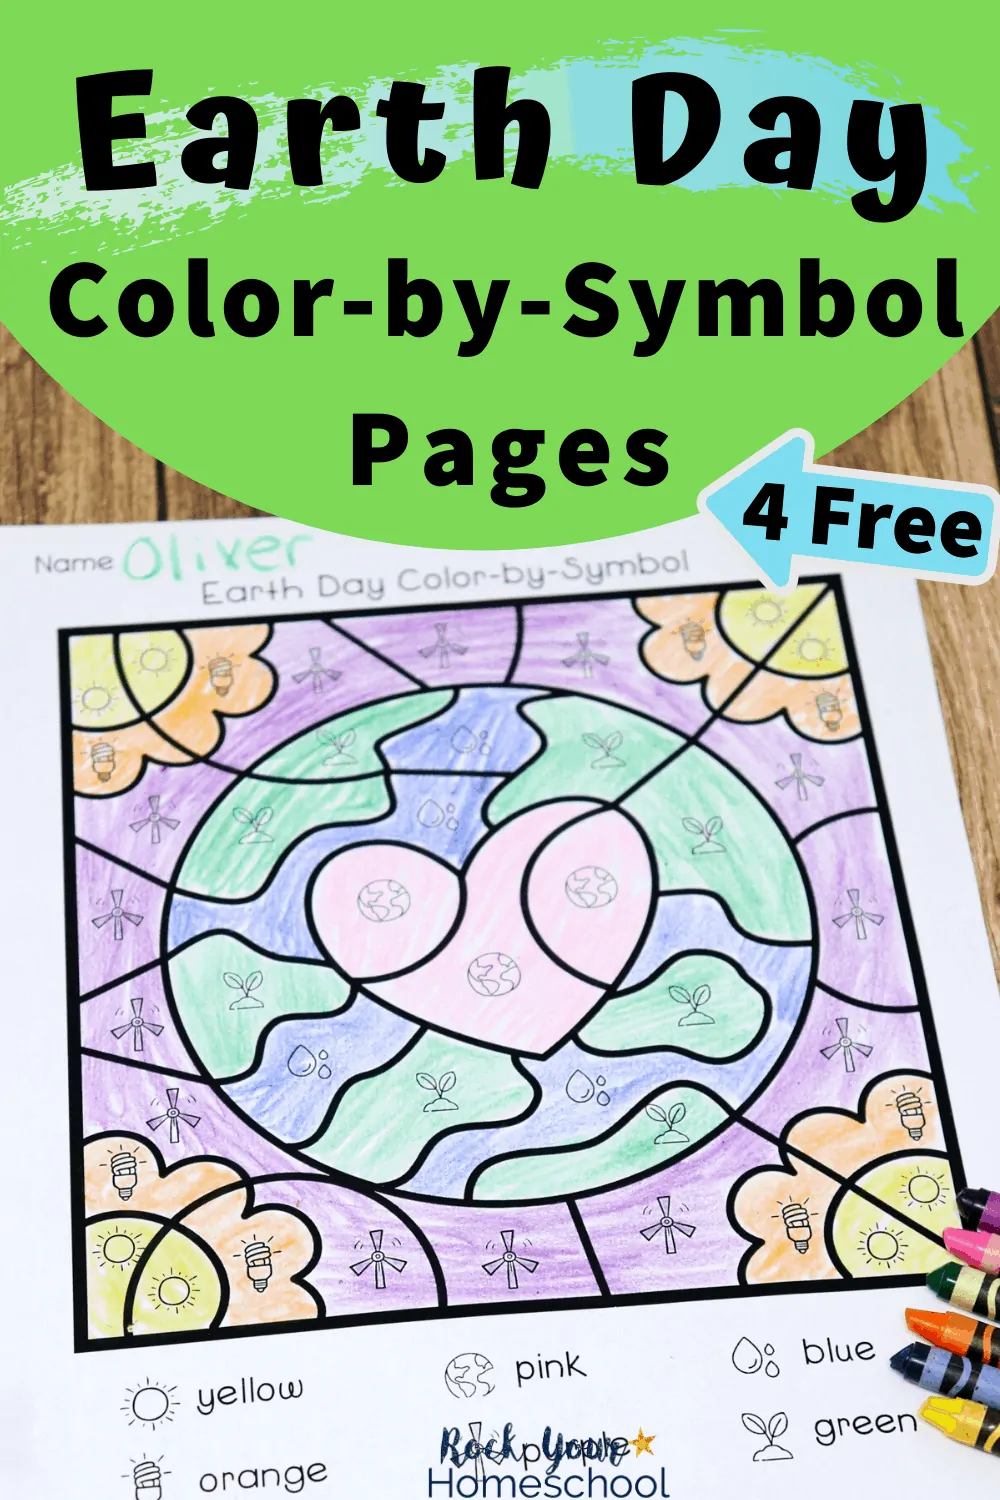 Free Coloring Activities for a Fun Earth Day with Kids